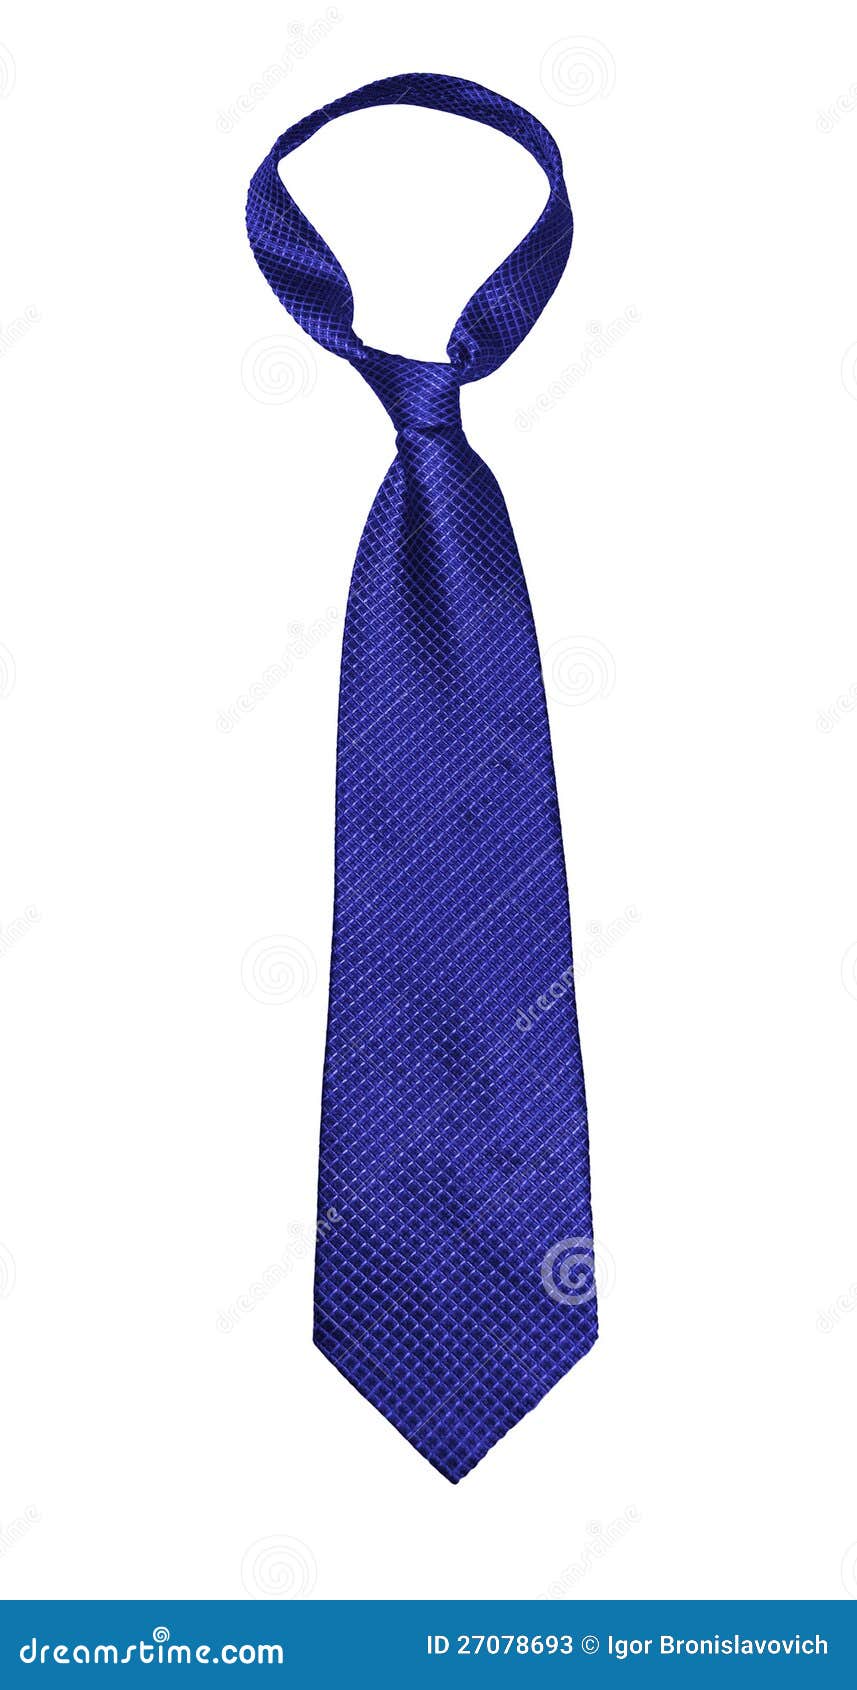 Classic office tie stock image. Image of object, business - 27078693